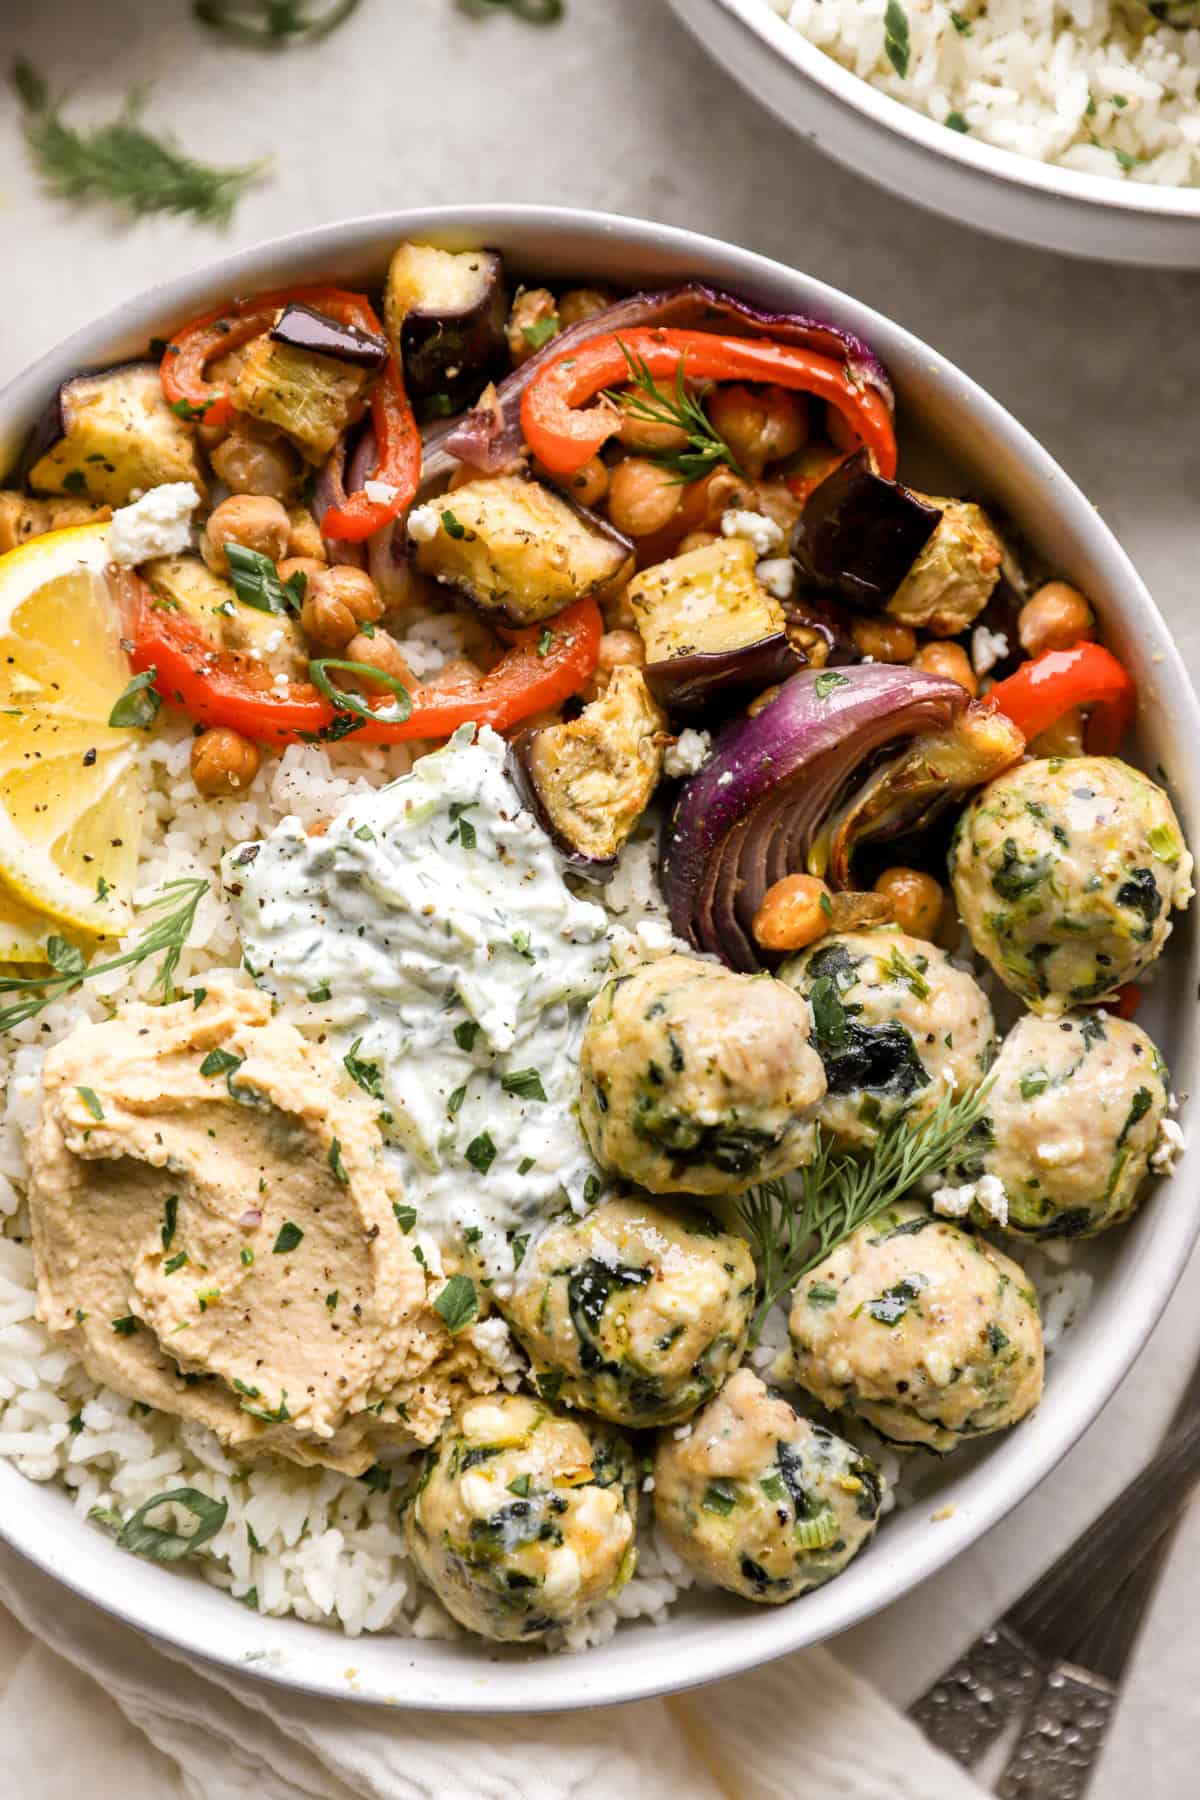 above image of a plate filled with greek chicken meatballs, roasted chickpeas, veggies, and hummus.